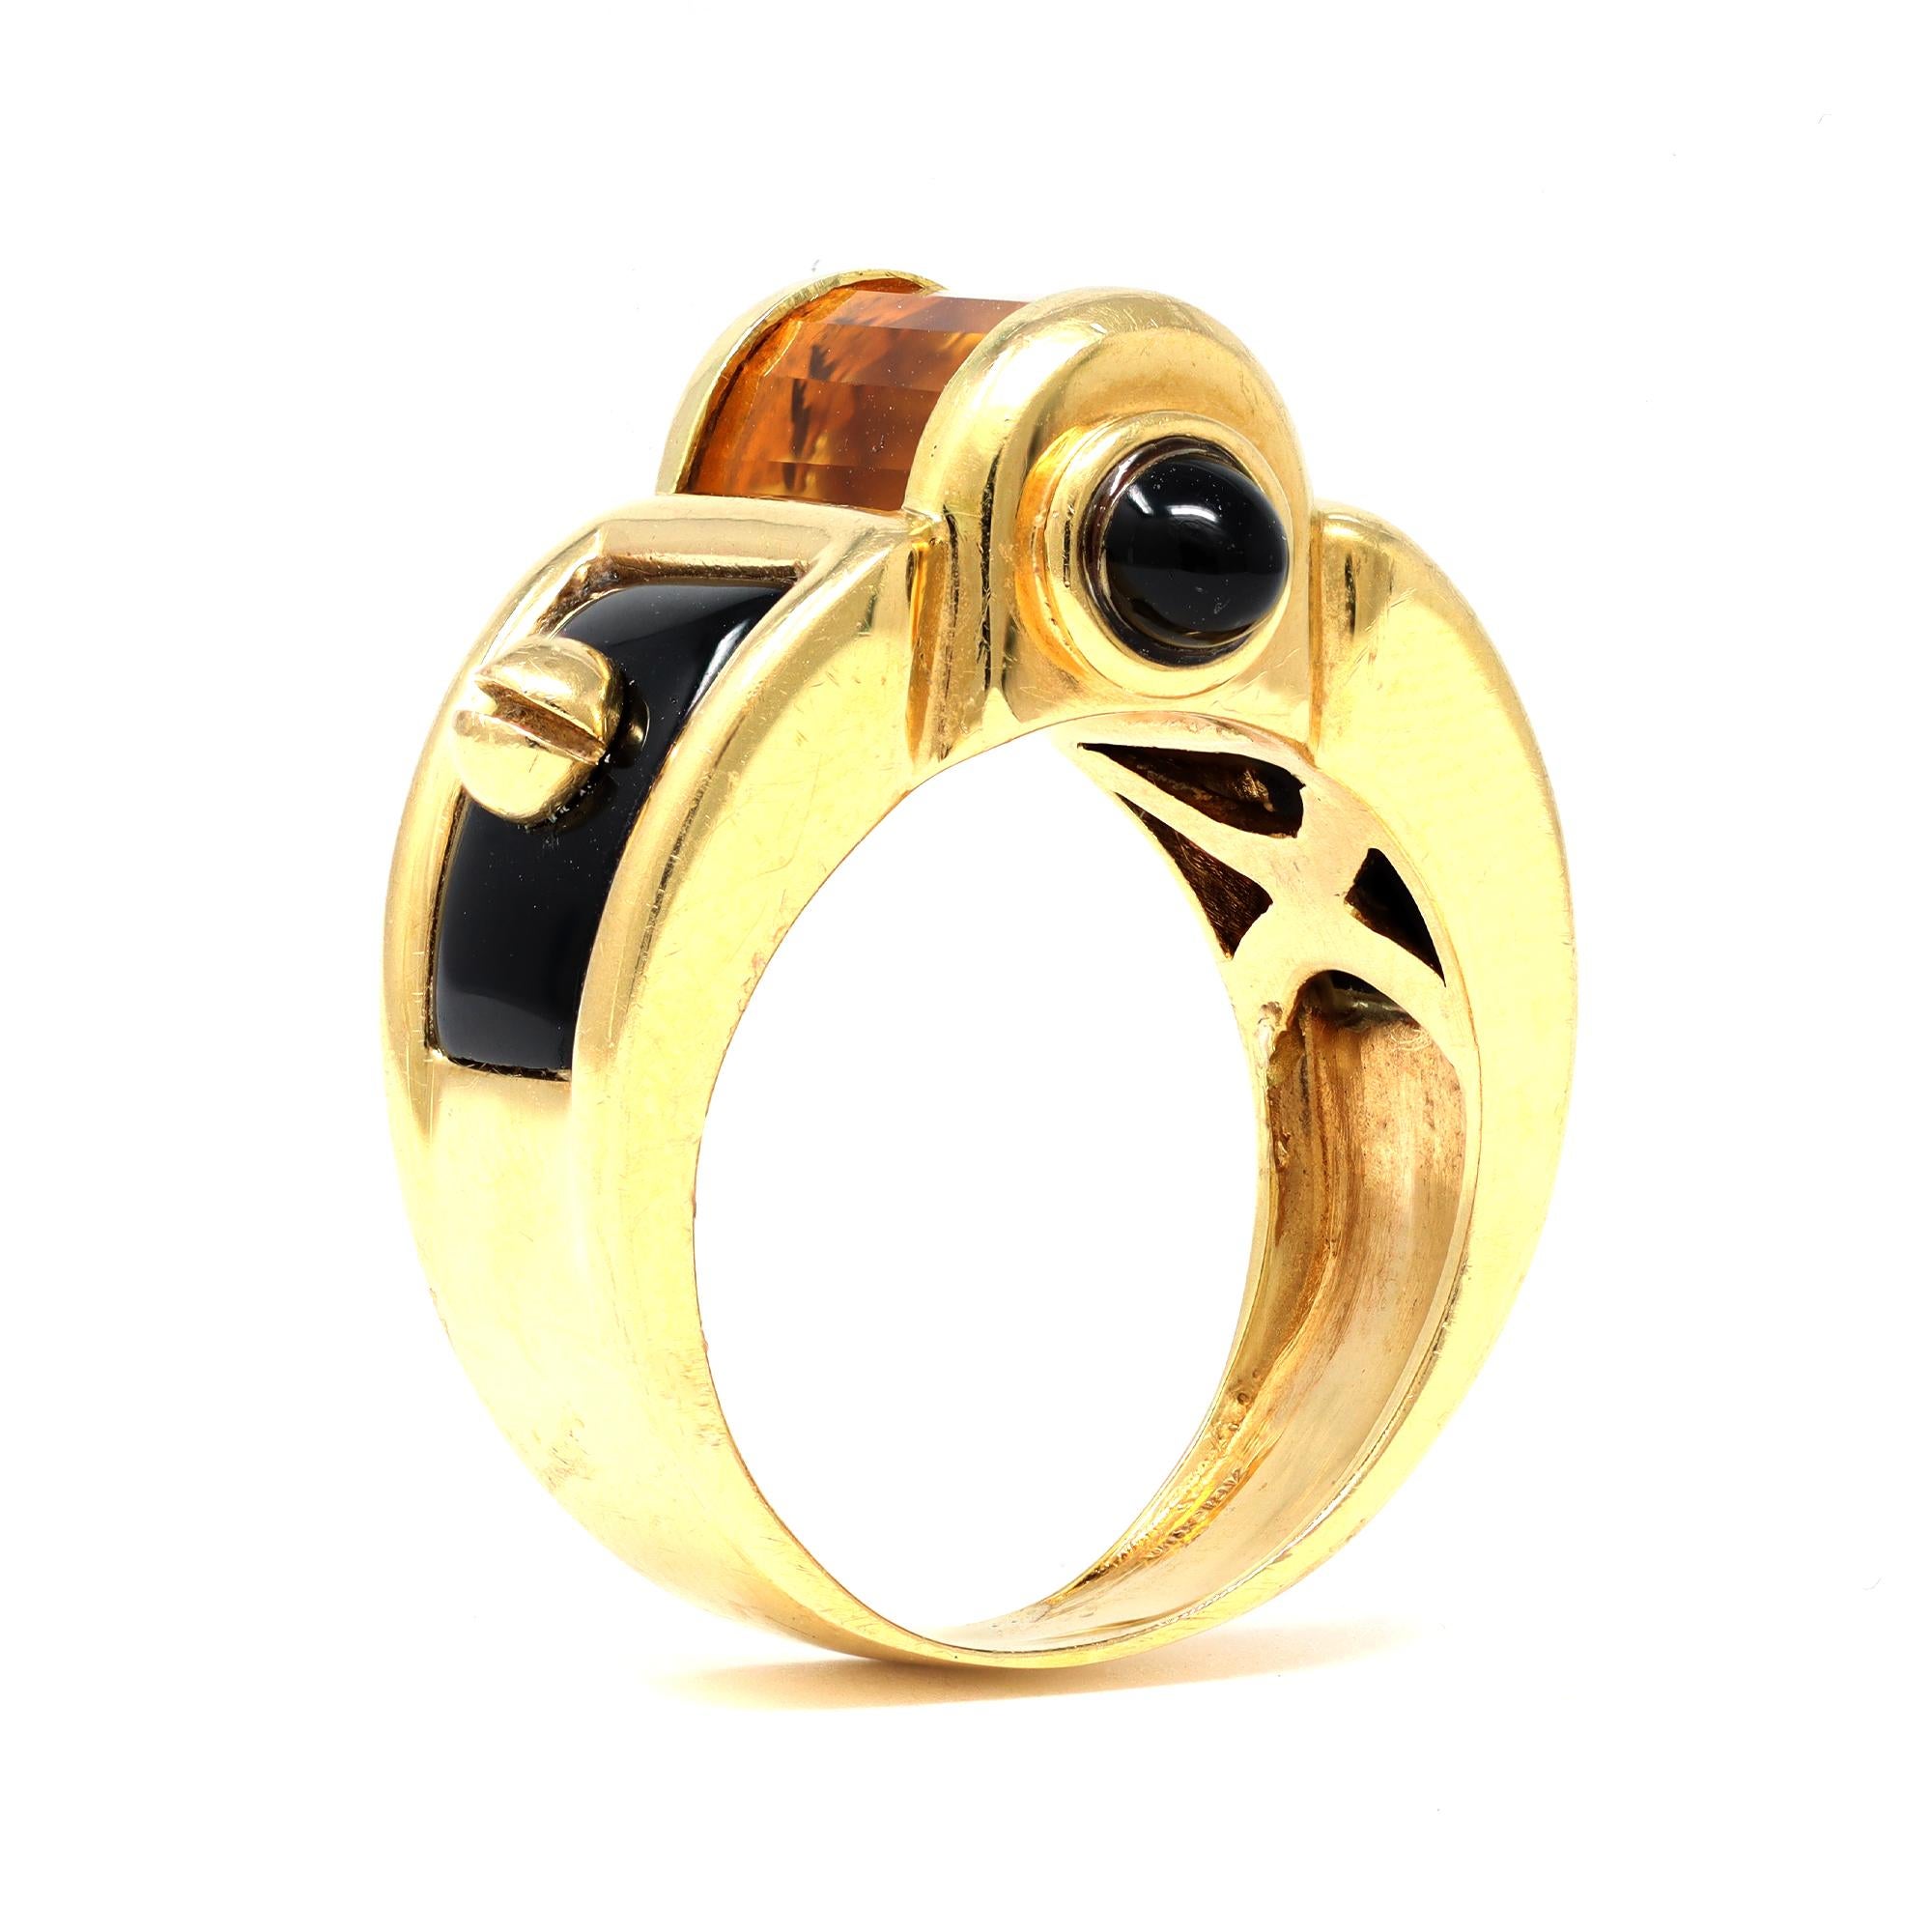 Modern Citrine & Onyx Cocktail Ring Set in 18k Yellow Gold